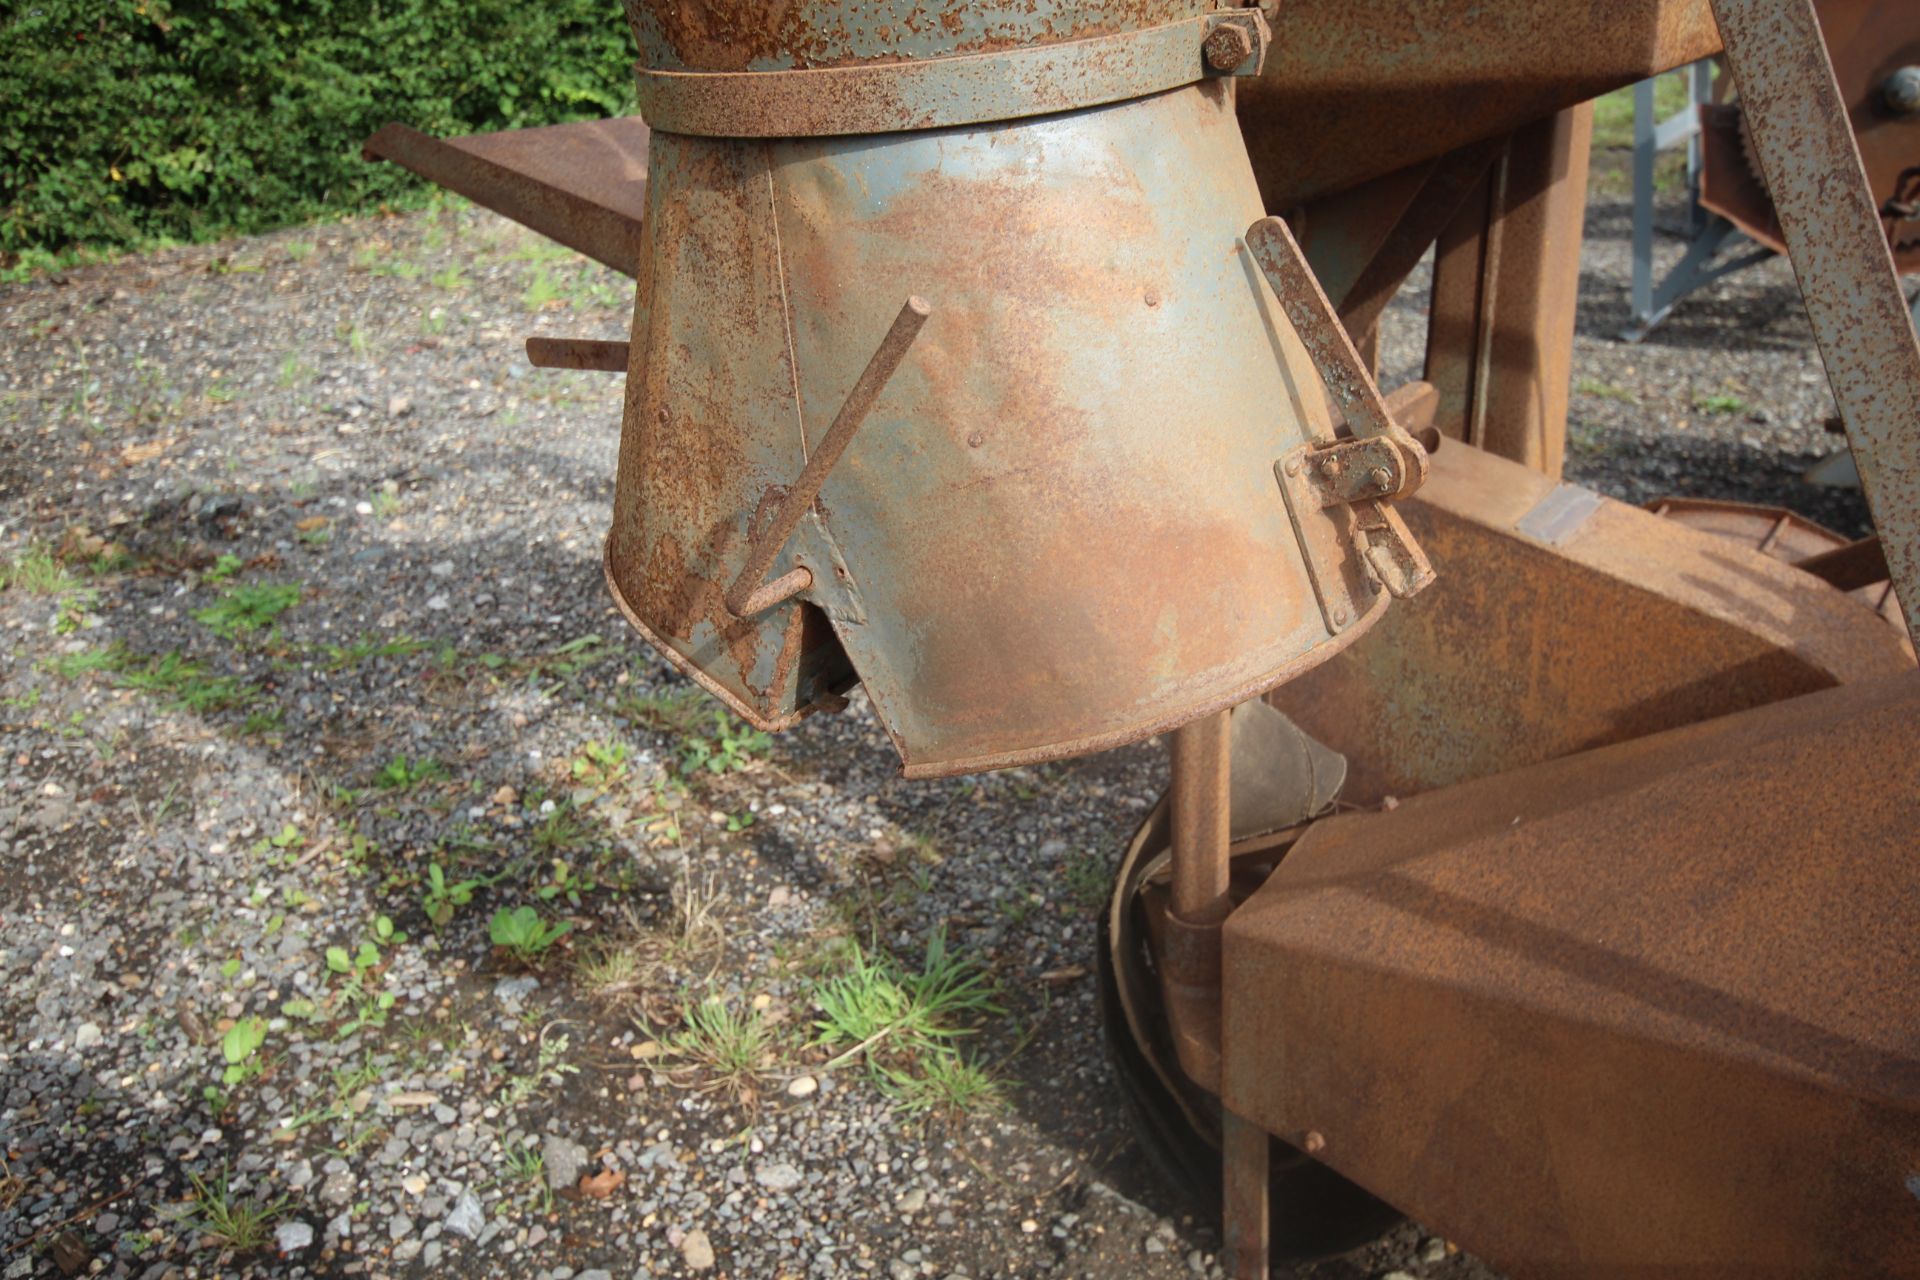 Ferguson Portable Hammer Mill. Model Number H-LE-A20. Serial Number HFM605. With various screens. - Image 14 of 18